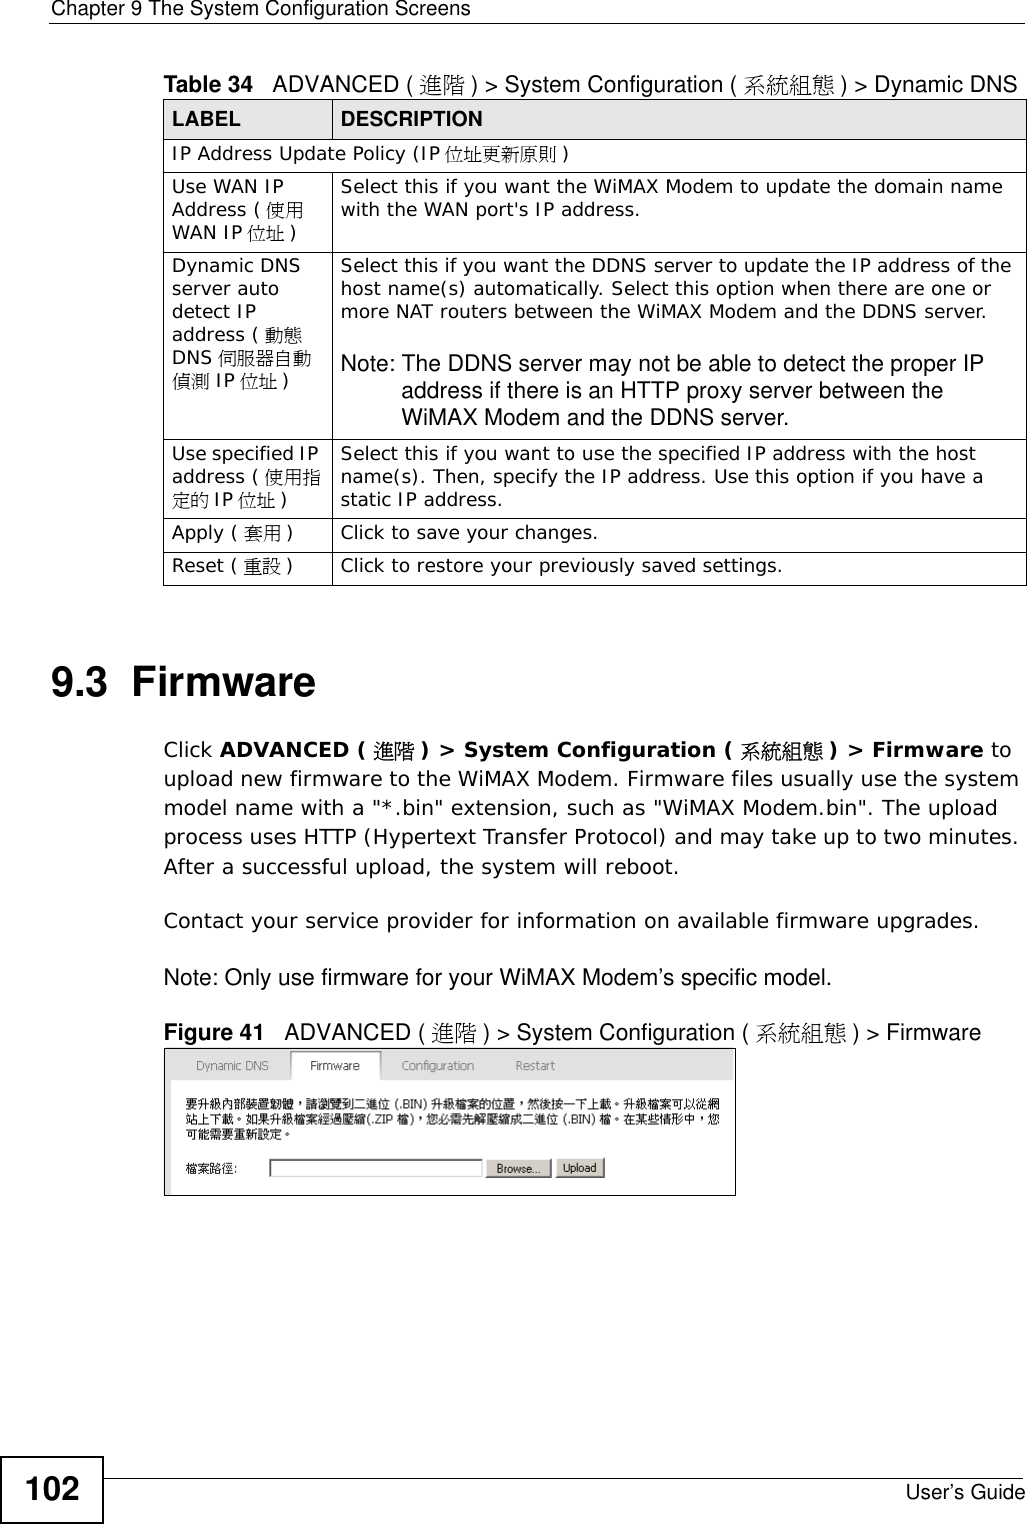 Chapter 9 The System Configuration ScreensUser’s Guide1029.3  FirmwareClick ADVANCED ( 進階 ) &gt; System Configuration ( 系統組態 ) &gt; Firmware to upload new firmware to the WiMAX Modem. Firmware files usually use the system model name with a &quot;*.bin&quot; extension, such as &quot;WiMAX Modem.bin&quot;. The upload process uses HTTP (Hypertext Transfer Protocol) and may take up to two minutes. After a successful upload, the system will reboot. Contact your service provider for information on available firmware upgrades.Note: Only use firmware for your WiMAX Modem’s specific model.Figure 41   ADVANCED ( 進階 ) &gt; System Configuration ( 系統組態 ) &gt; FirmwareIP Address Update Policy (IP 位址更新原則 )Use WAN IP Address ( 使用WAN IP 位址 )Select this if you want the WiMAX Modem to update the domain name with the WAN port&apos;s IP address.Dynamic DNS server auto detect IP address ( 動態DNS 伺服器自動偵測 IP 位址 )Select this if you want the DDNS server to update the IP address of the host name(s) automatically. Select this option when there are one or more NAT routers between the WiMAX Modem and the DDNS server.Note: The DDNS server may not be able to detect the proper IP address if there is an HTTP proxy server between the WiMAX Modem and the DDNS server.Use specified IP address ( 使用指定的 IP 位址 )Select this if you want to use the specified IP address with the host name(s). Then, specify the IP address. Use this option if you have a static IP address.Apply ( 套用 ) Click to save your changes.Reset ( 重設 ) Click to restore your previously saved settings.Table 34   ADVANCED ( 進階 ) &gt; System Configuration ( 系統組態 ) &gt; Dynamic DNS LABEL DESCRIPTION